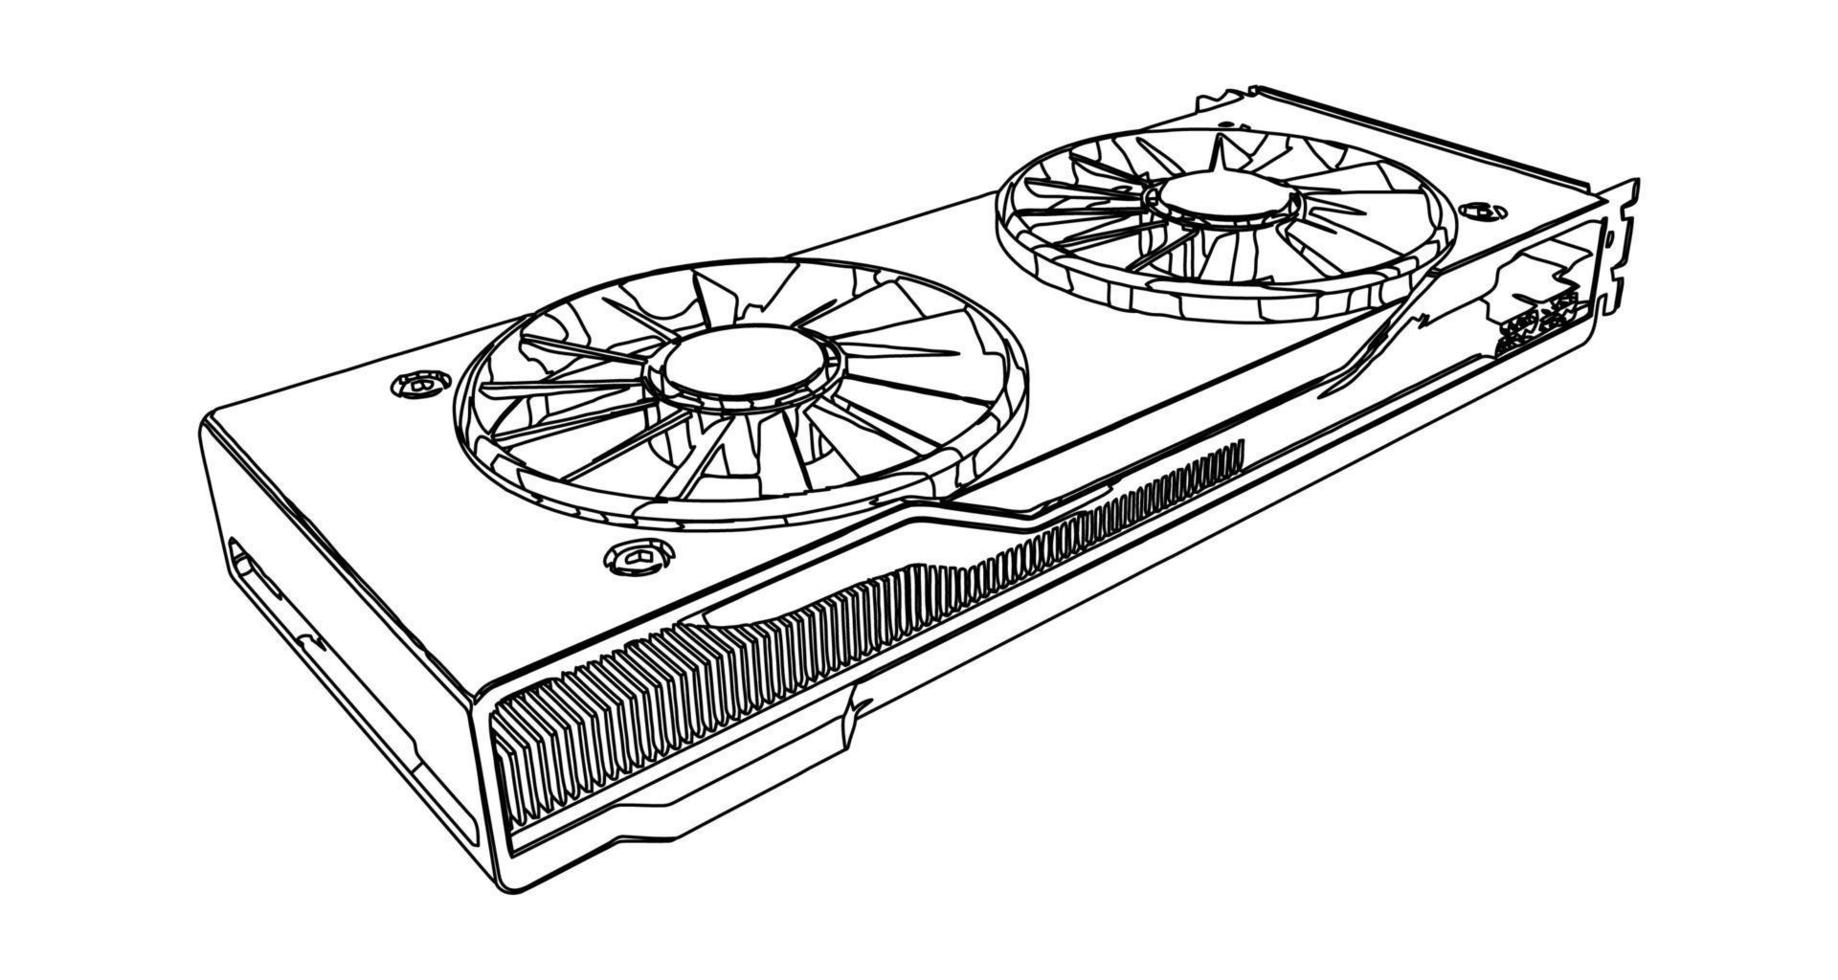 Sketch of a video card in isometric projection, isolated outline vector illustration on a white background. Graphics or display card, graphics or video adapter for gaming, mining, rendering.